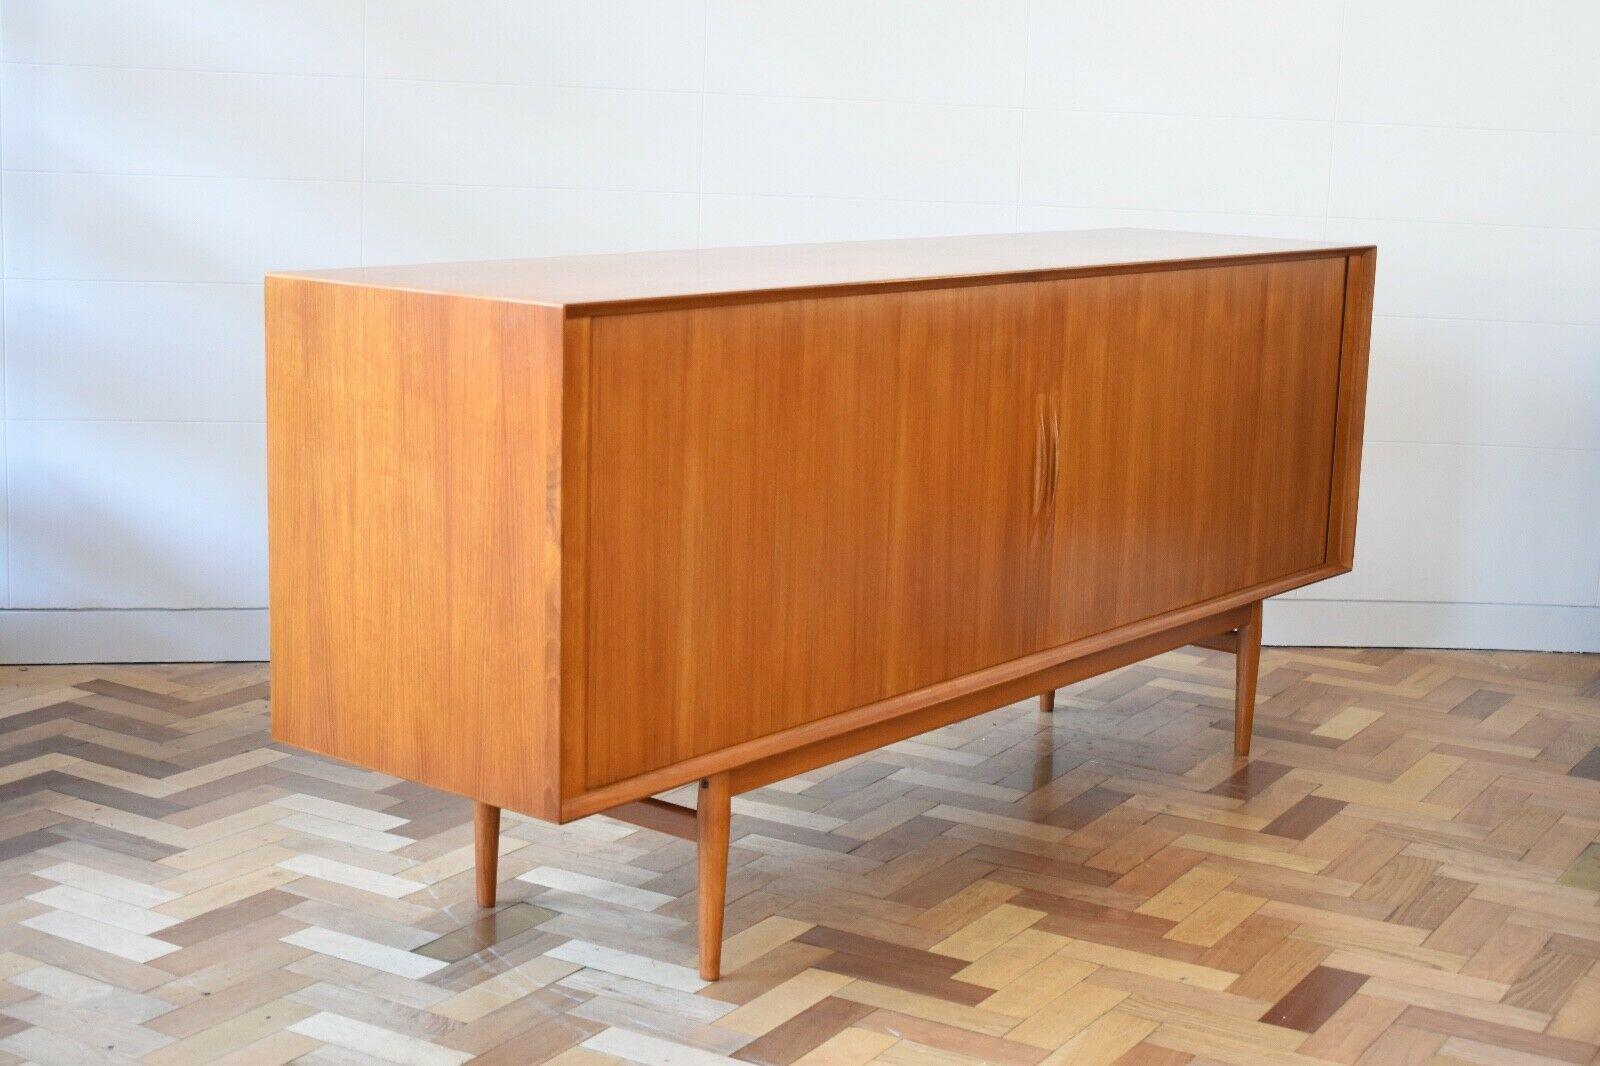 Splendid 1960s teak wood cradenza by Arne Vodder for Sibast Møbler. This minimalist design features impressively crafted tambour doors with laid sculpted handles which slide to reveal seven shelving compartments and three draws. The piece sits on